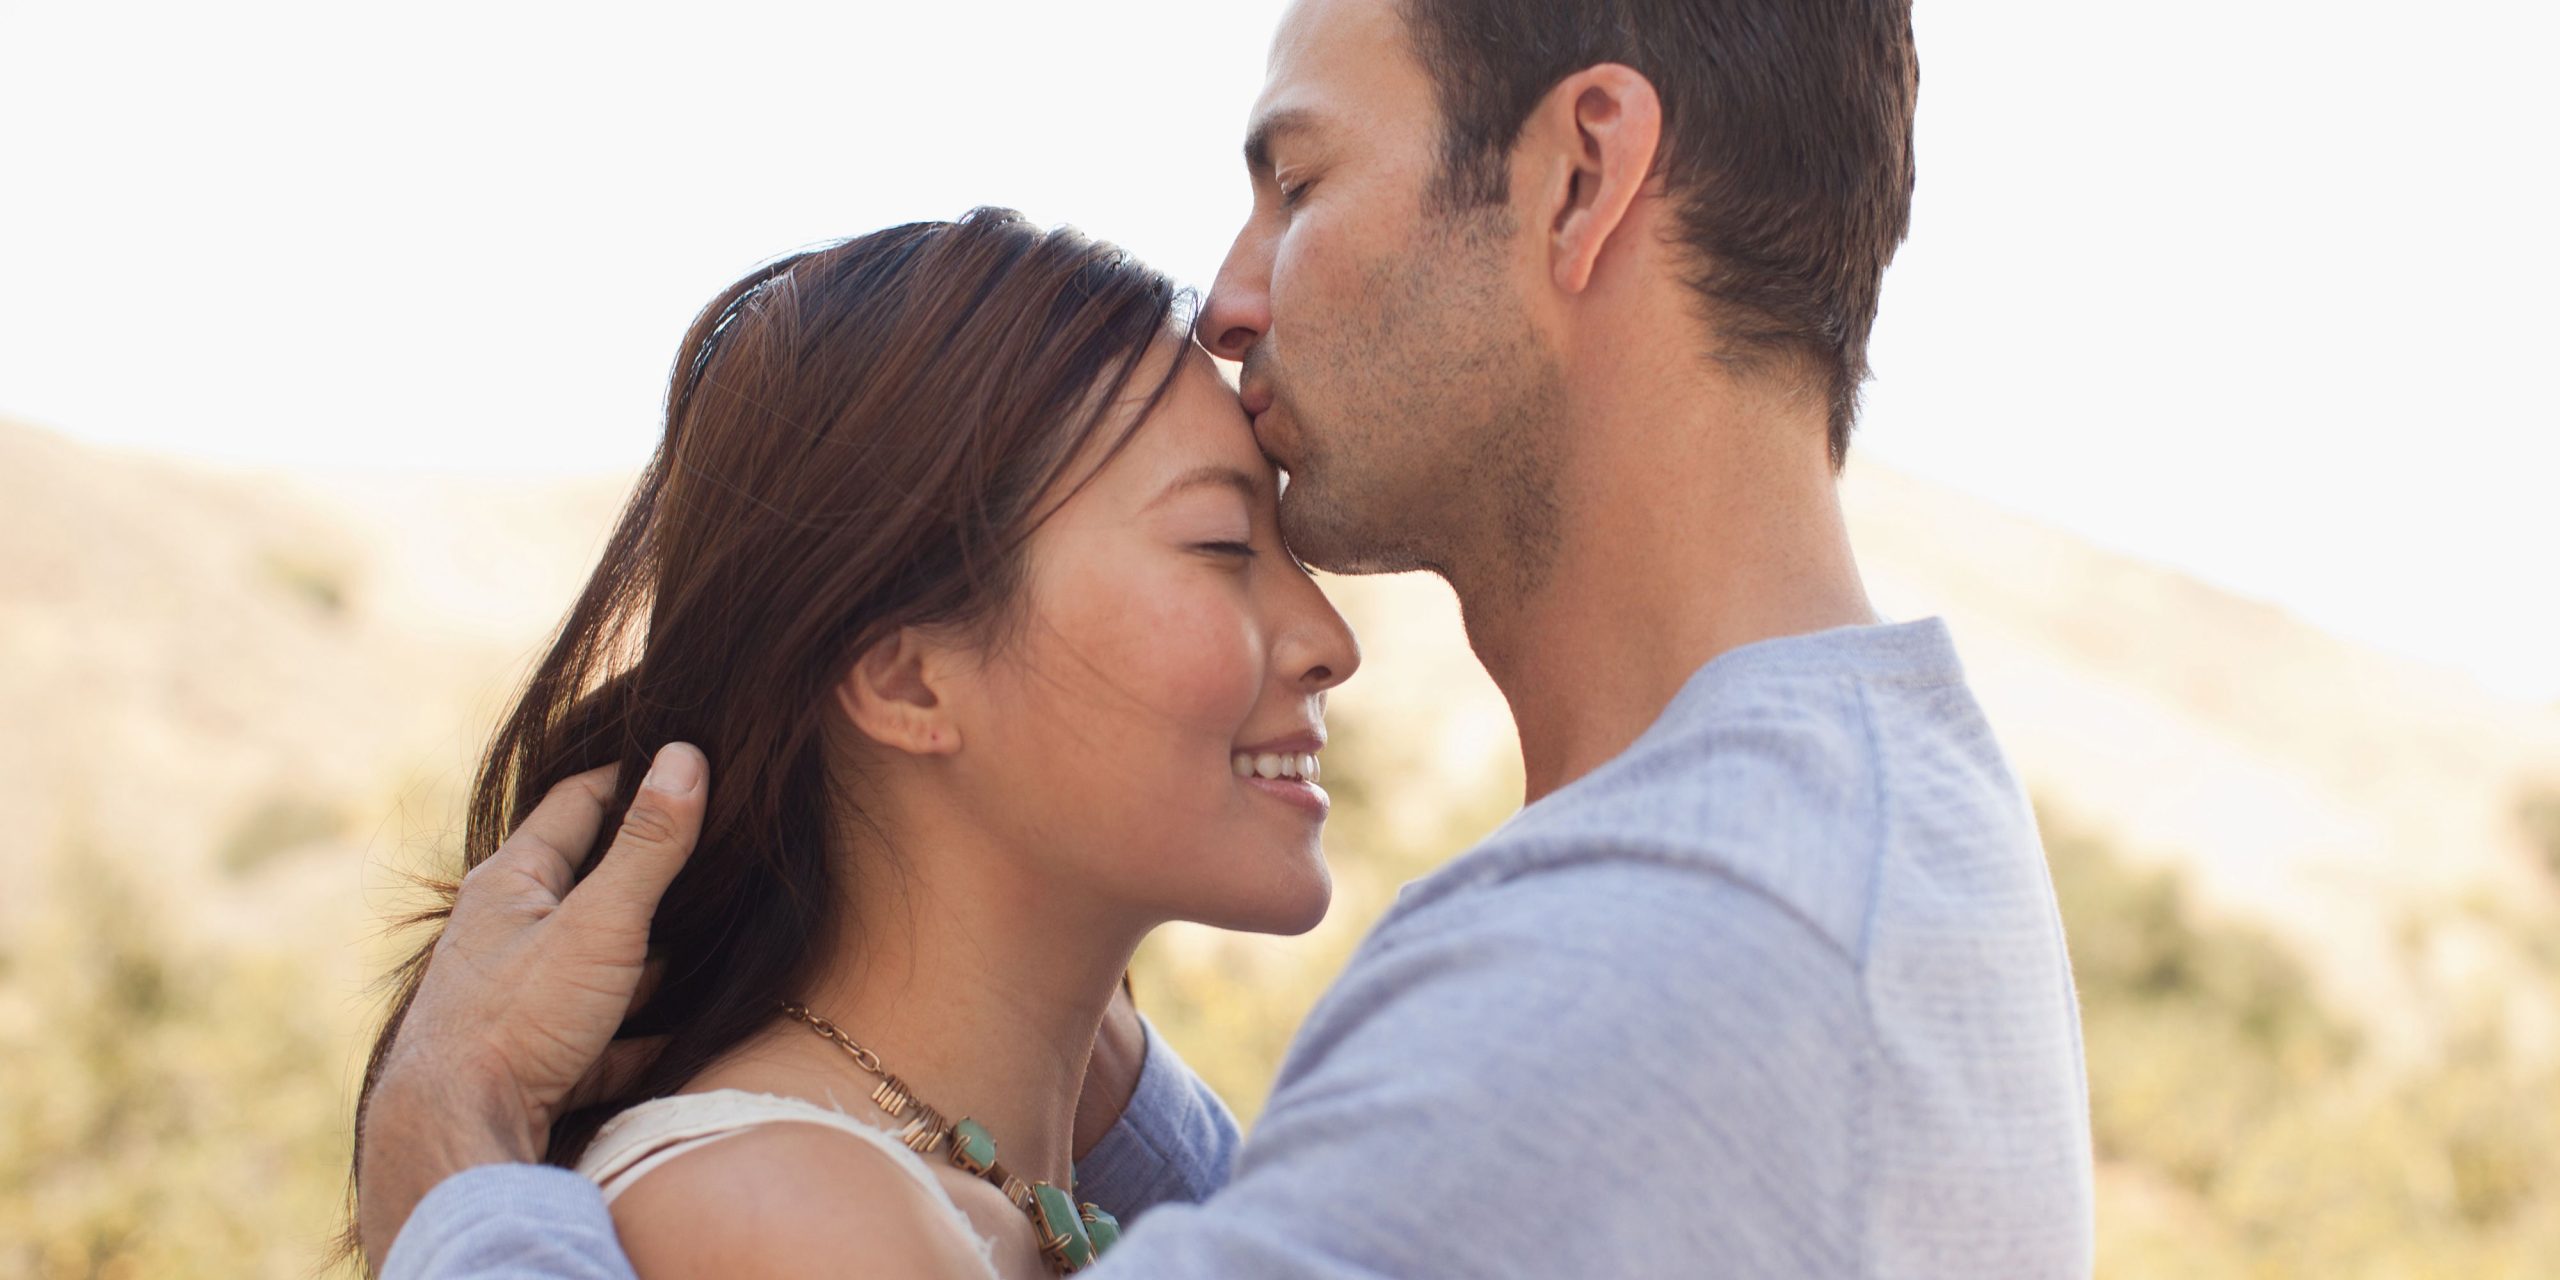 10 Deeper Ways to Show Your Love